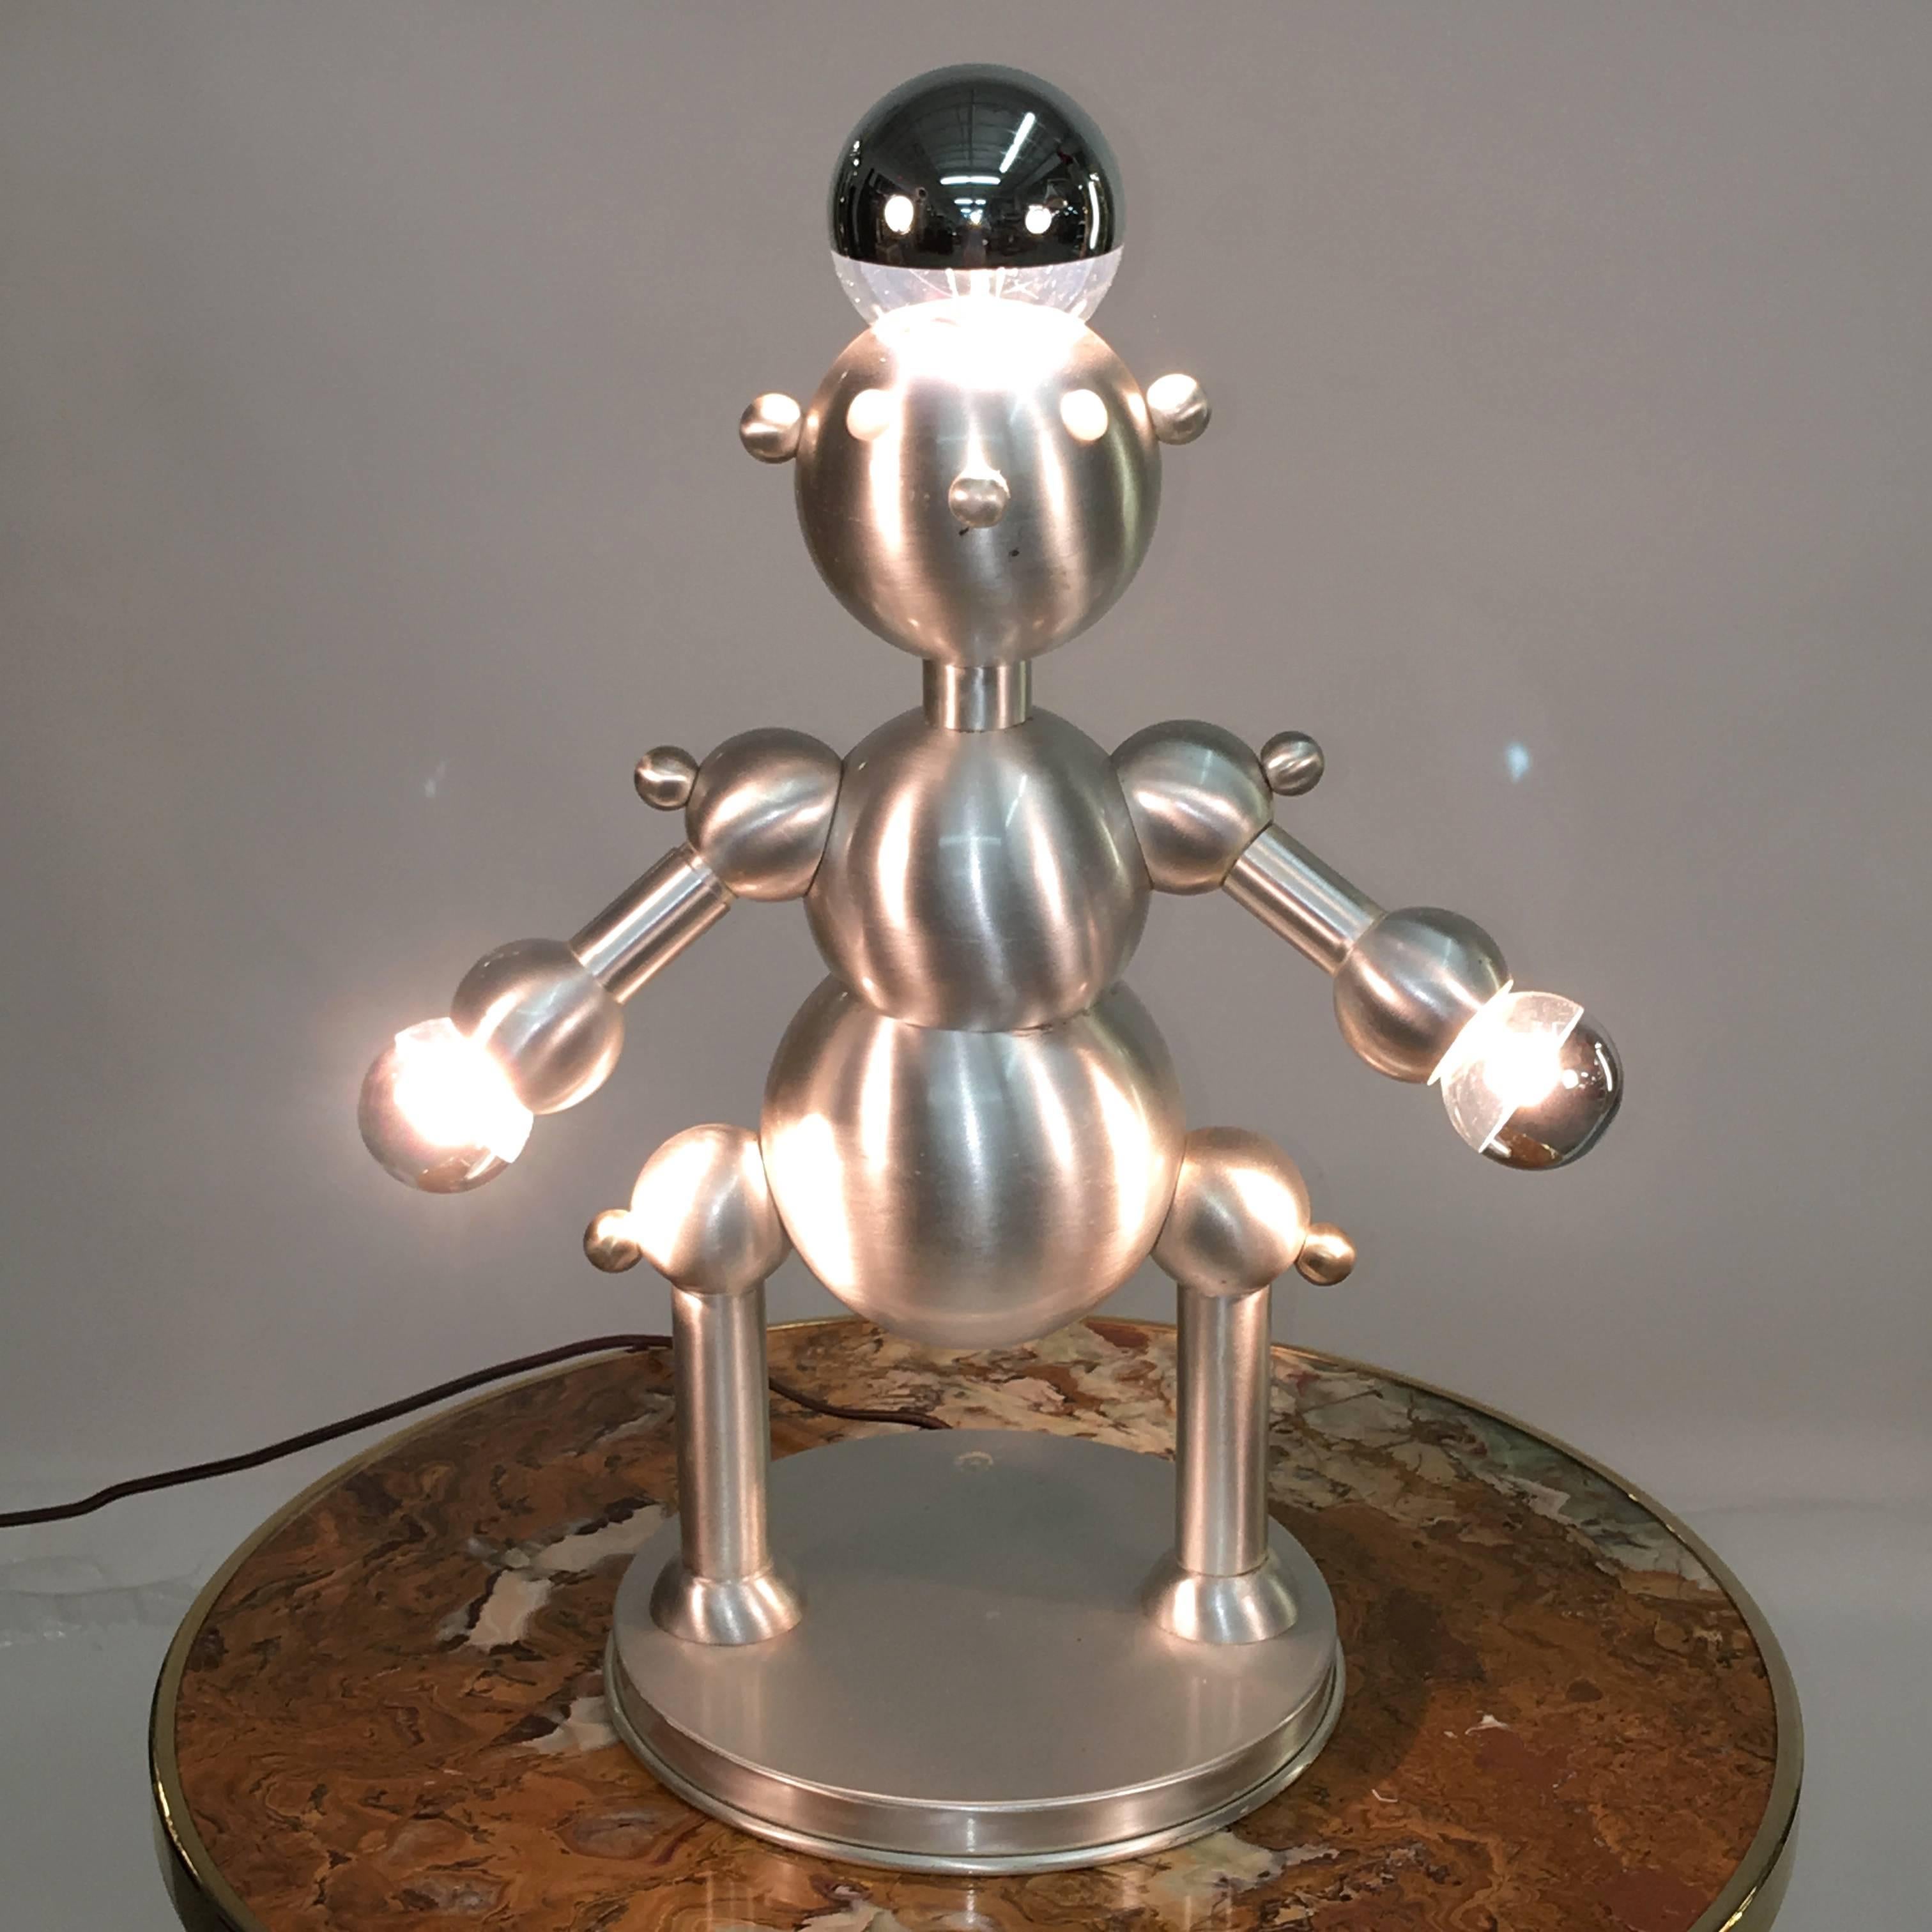 Brushed Silver Plated Robot Lamp